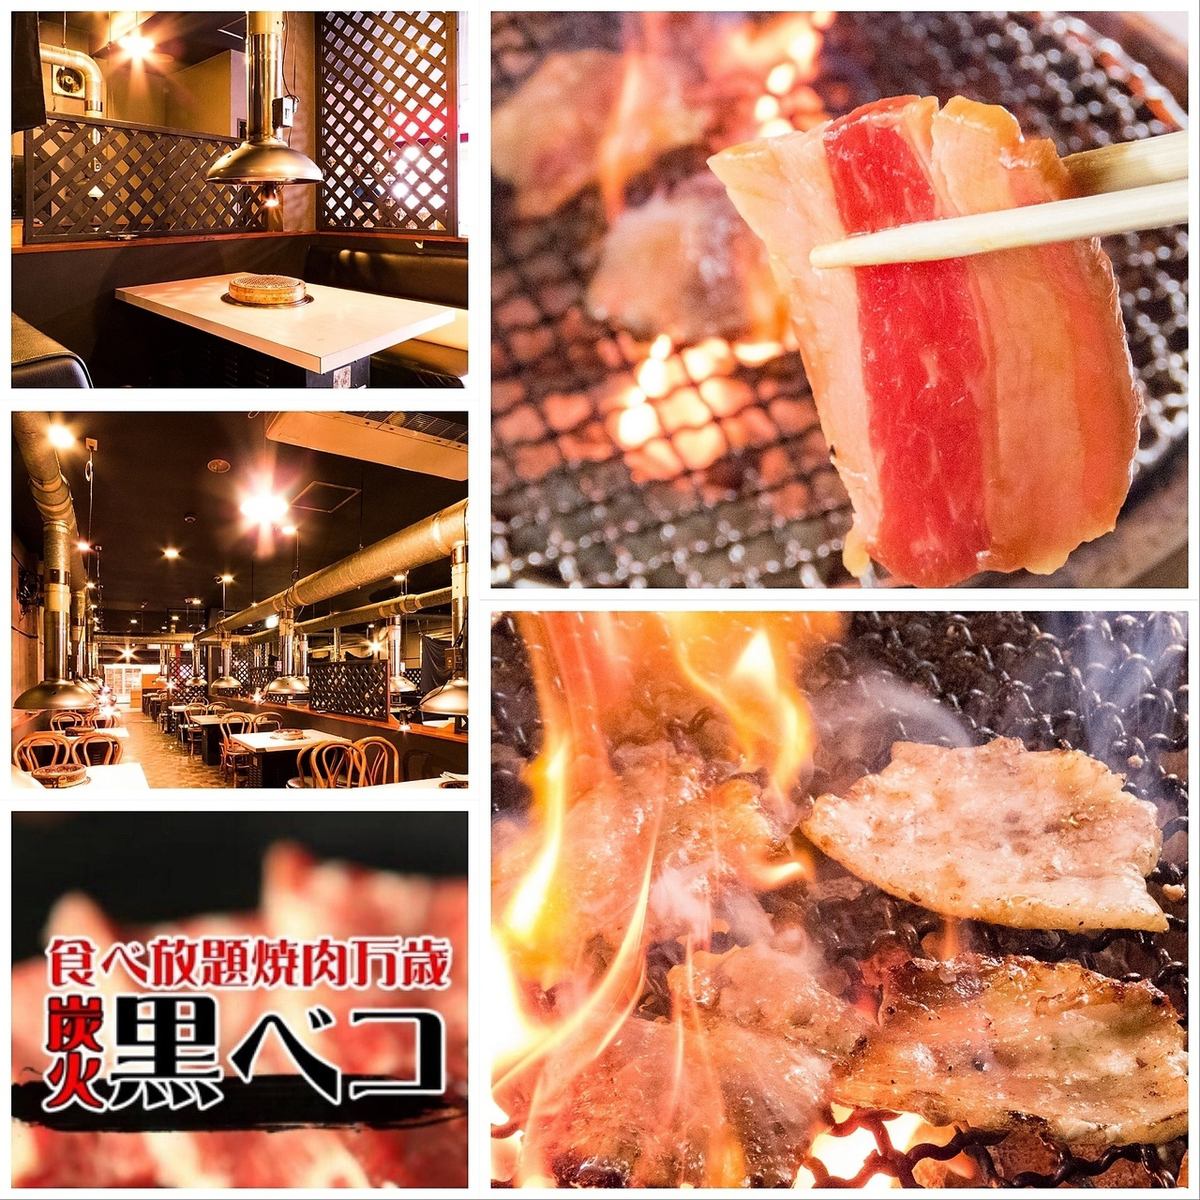 【120 kinds of rich menu】 You can enjoy unlimited time of unlimited yakiniku all you can do with charcoal fire!